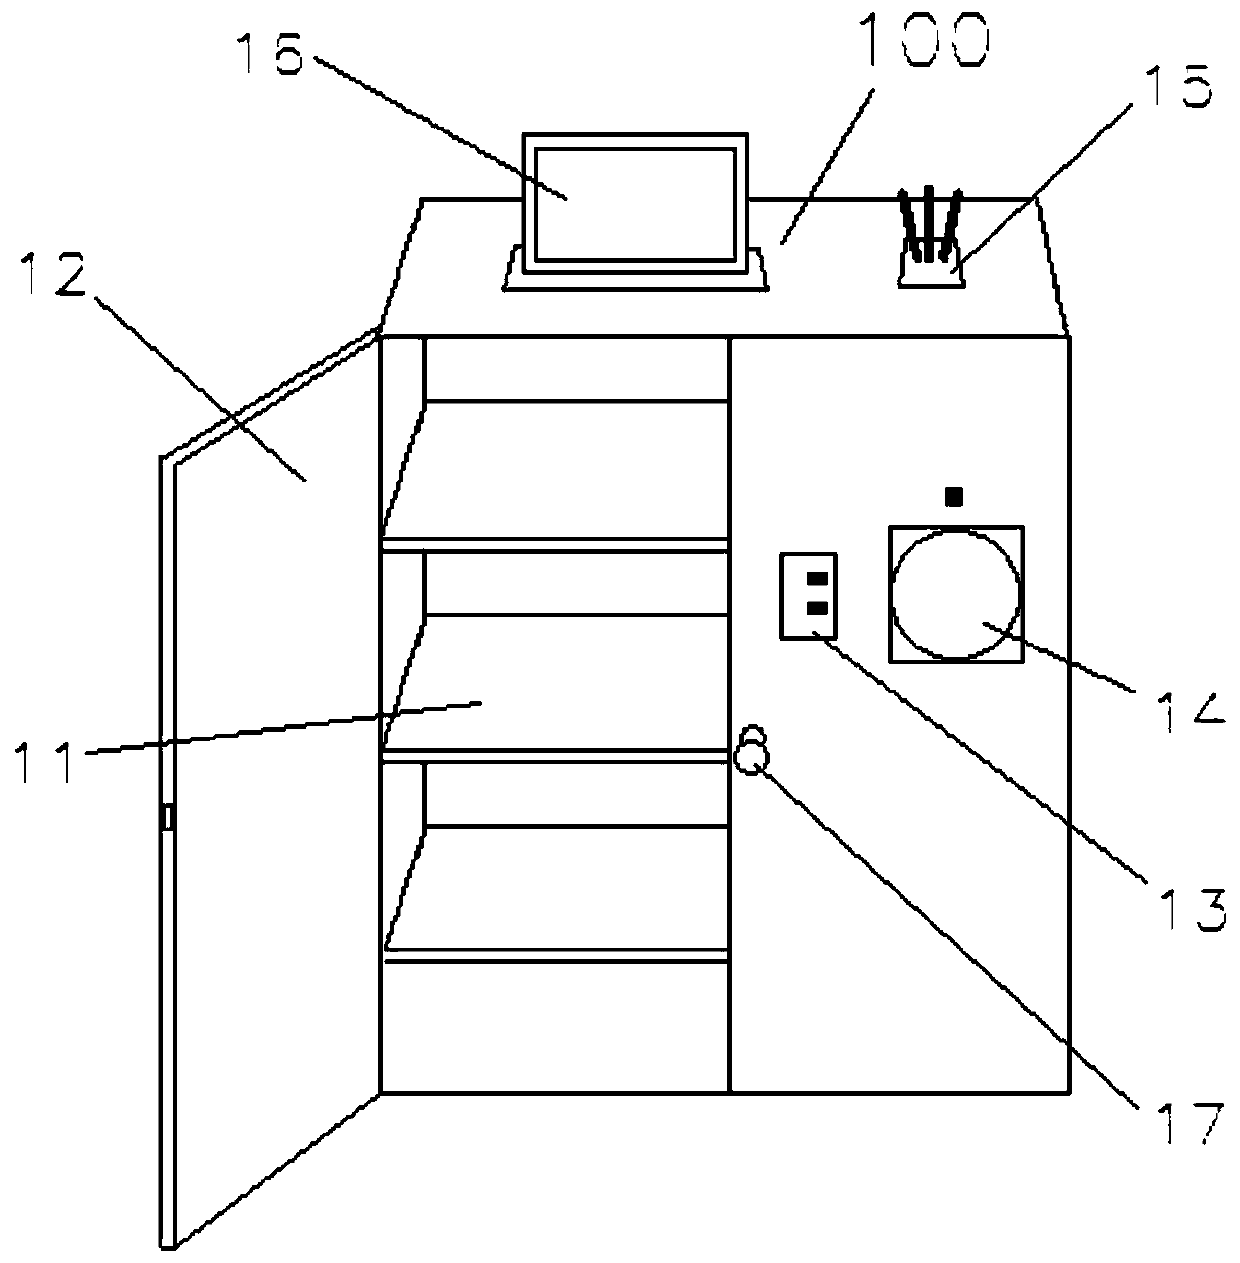 System and method for managing hazardous chemicals easy to produce poison and explode